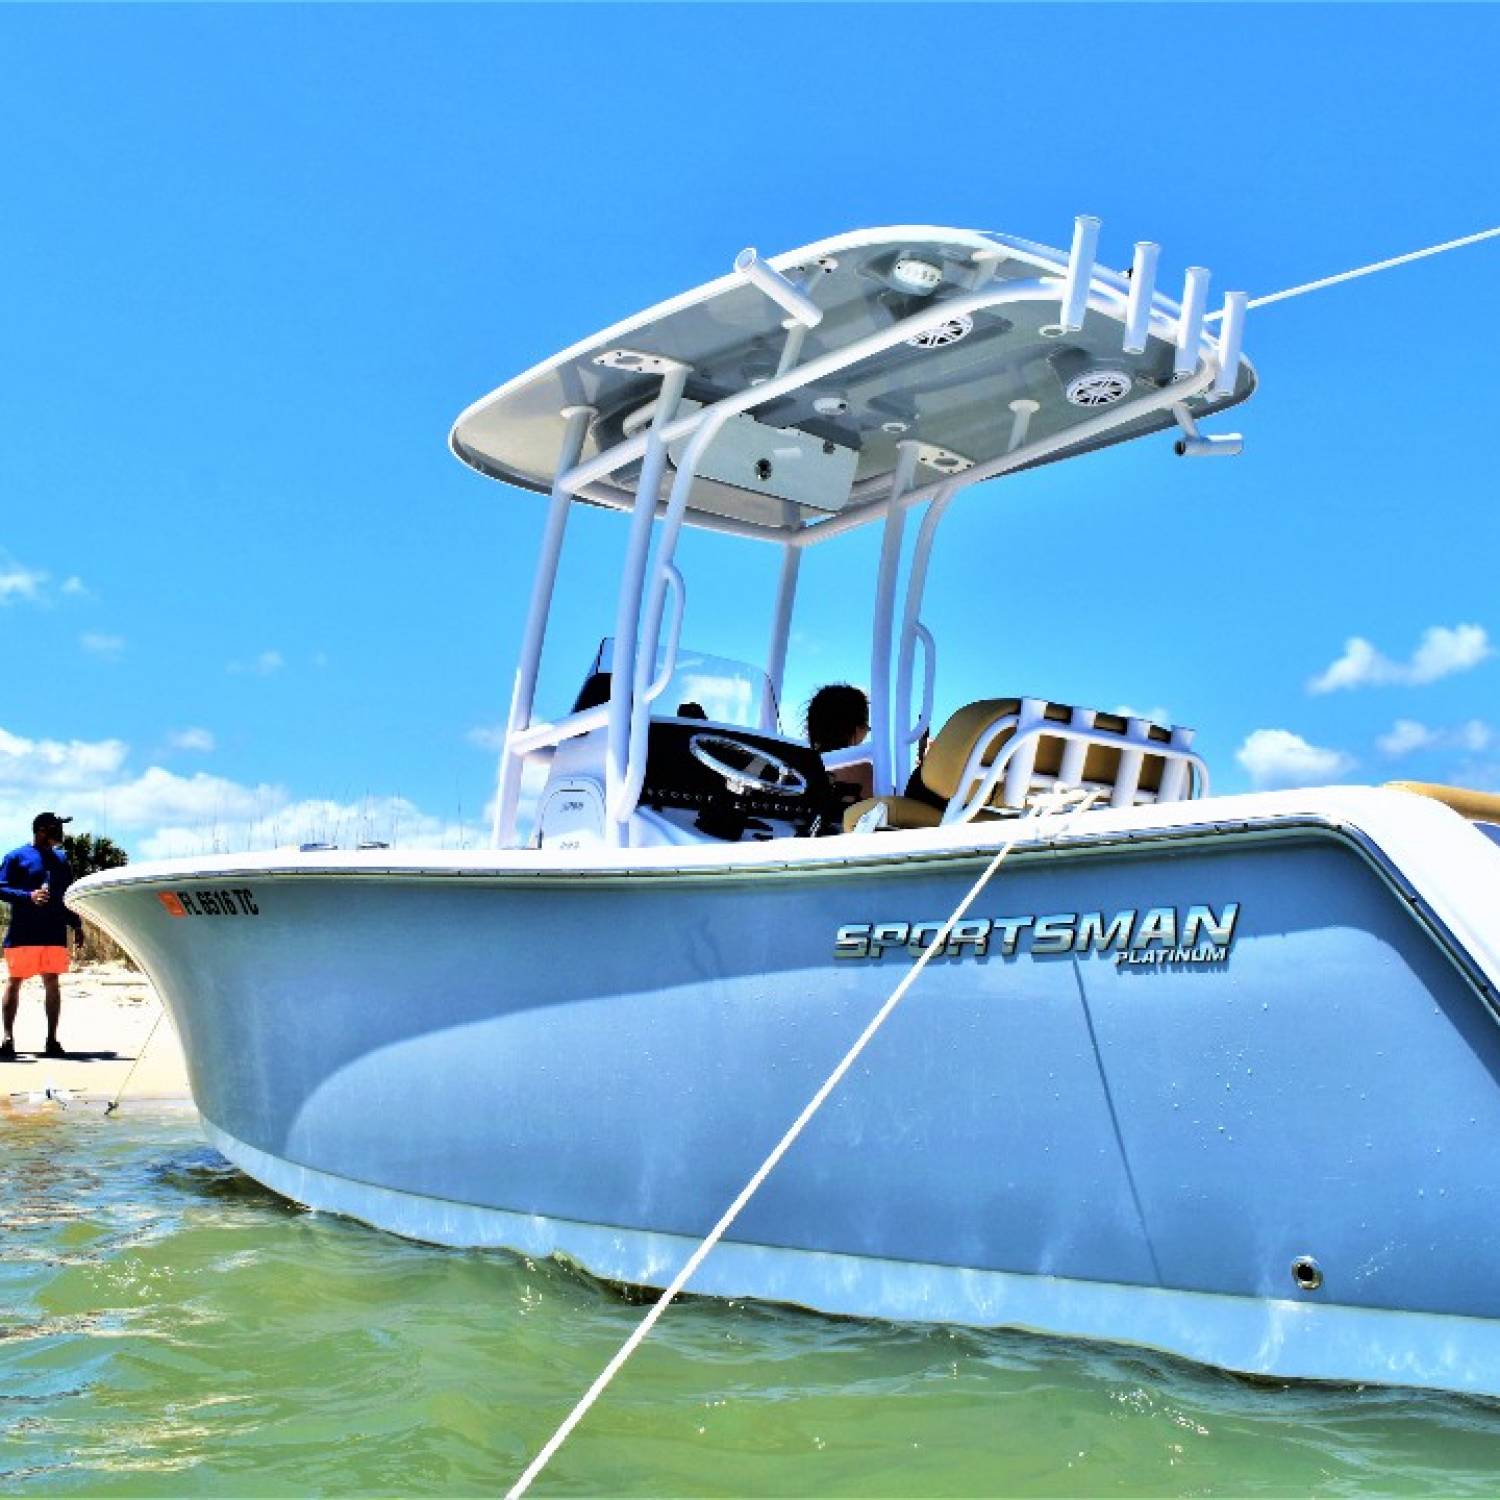 Title: 🏝 Island Life 🏝 - On board their Sportsman Open 232 Center Console - Location: Matanzas Inlet, St. Augustine FL. Participating in the Photo Contest #SportsmanMay